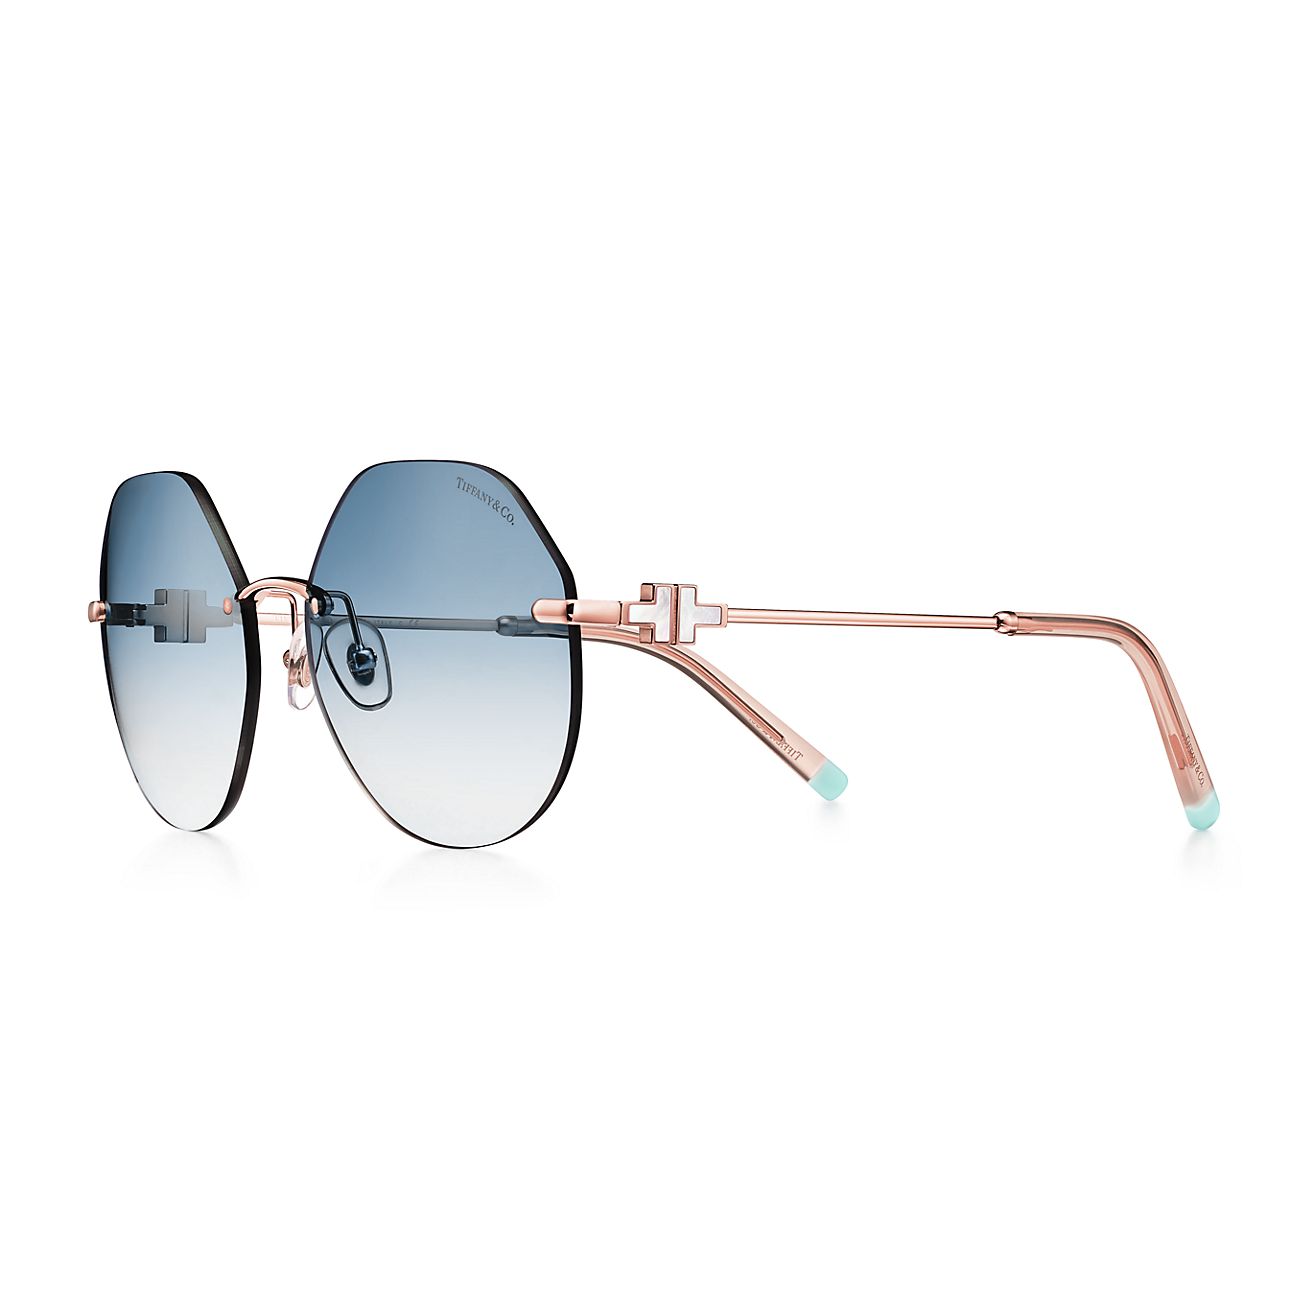 Tiffany T Hexagonal Sunglasses in Rose Gold-colored Metal with